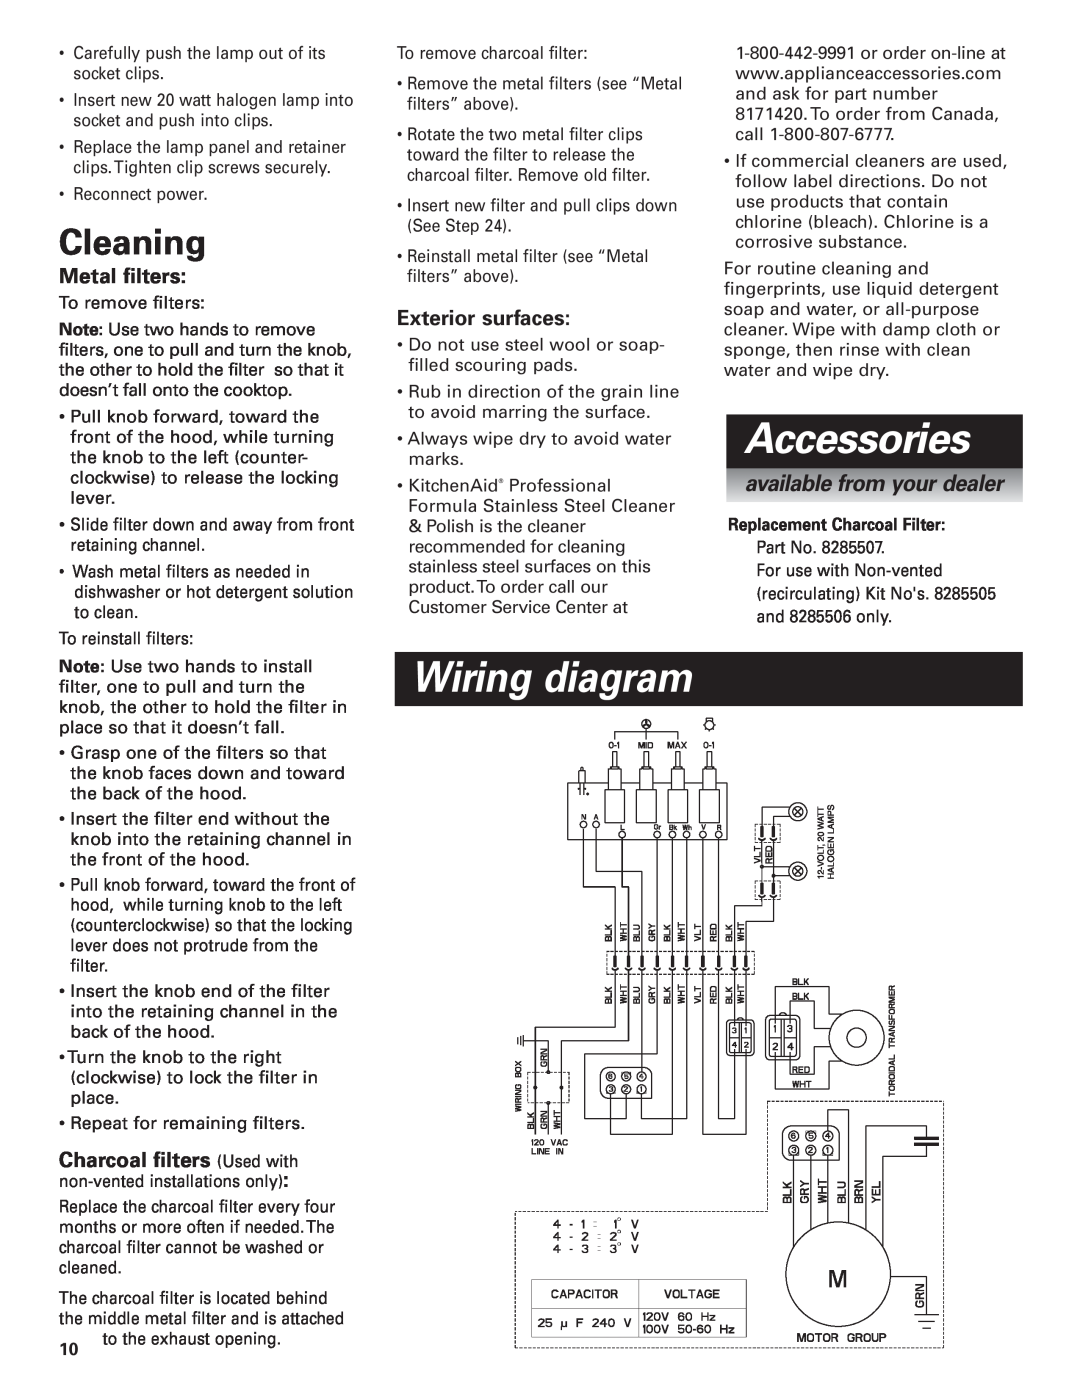 KitchenAid Pro Line Series Wiring diagram, Accessories, Cleaning, Metal filters, Exterior surfaces 